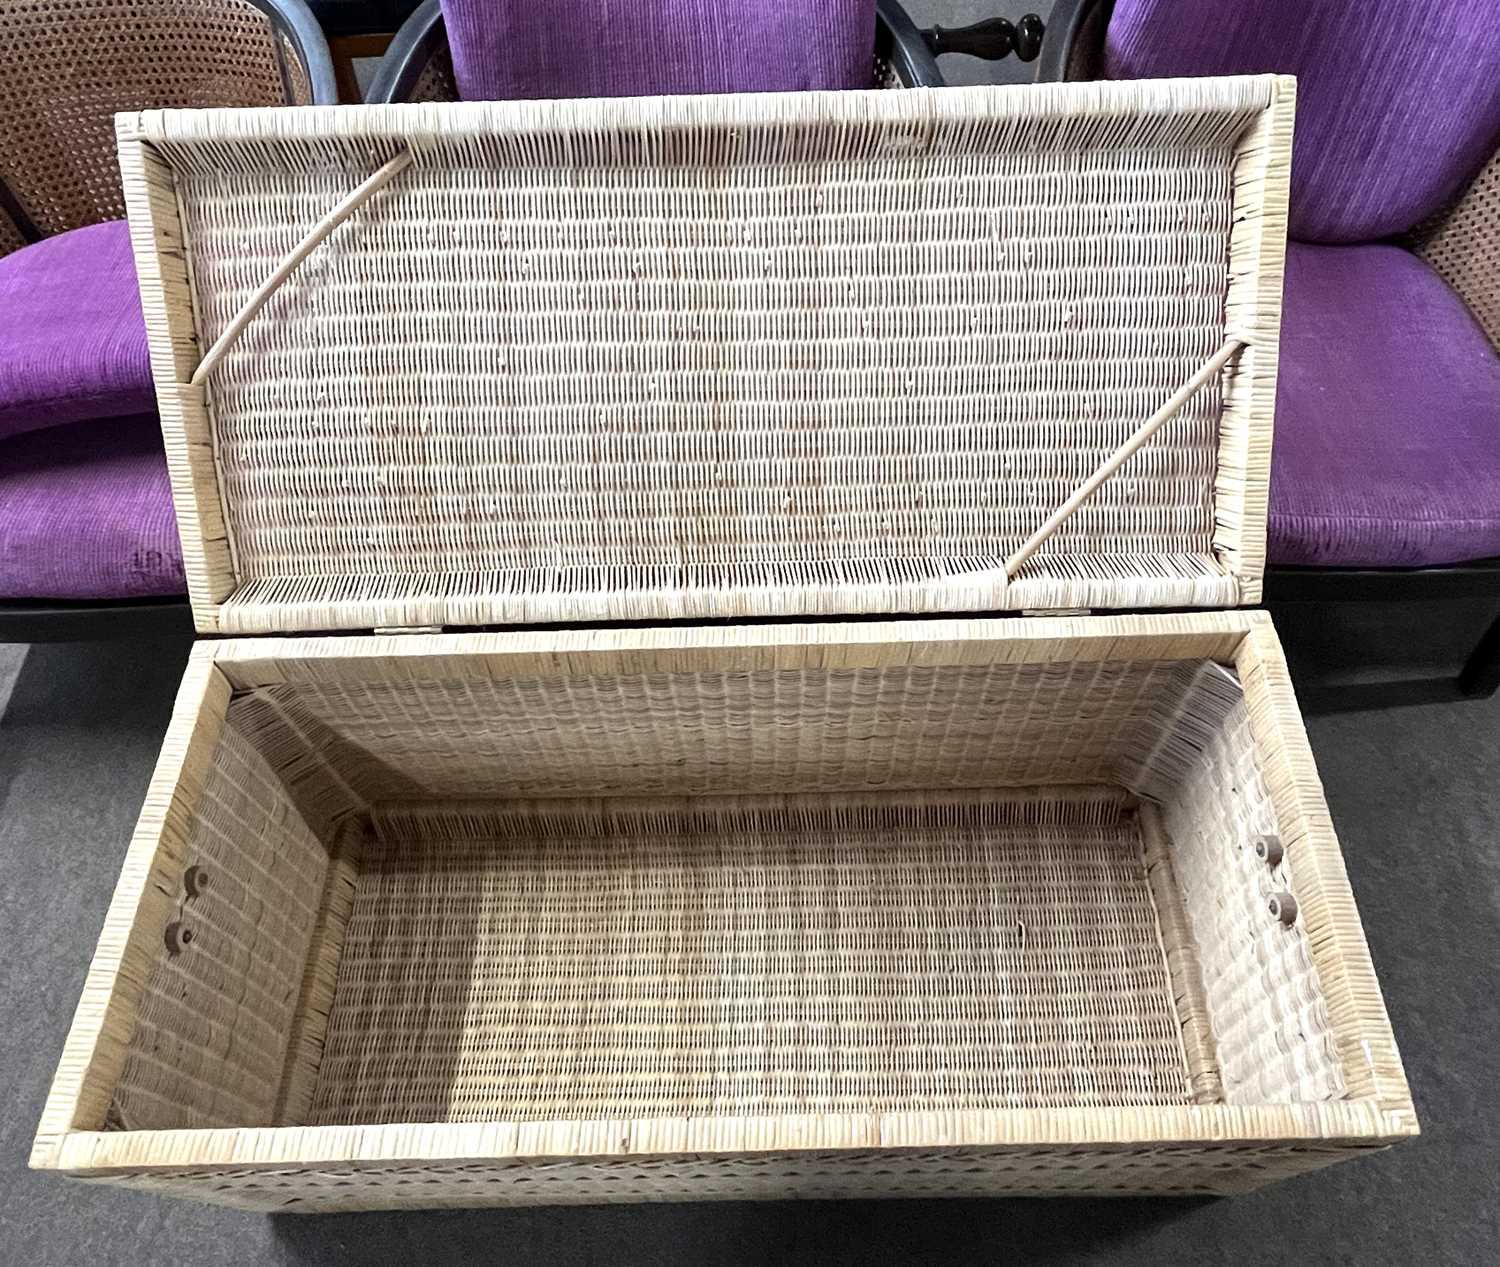 A mid 20th Century wicker blanket chest with brass handles at either end, 101cm long - Image 3 of 3